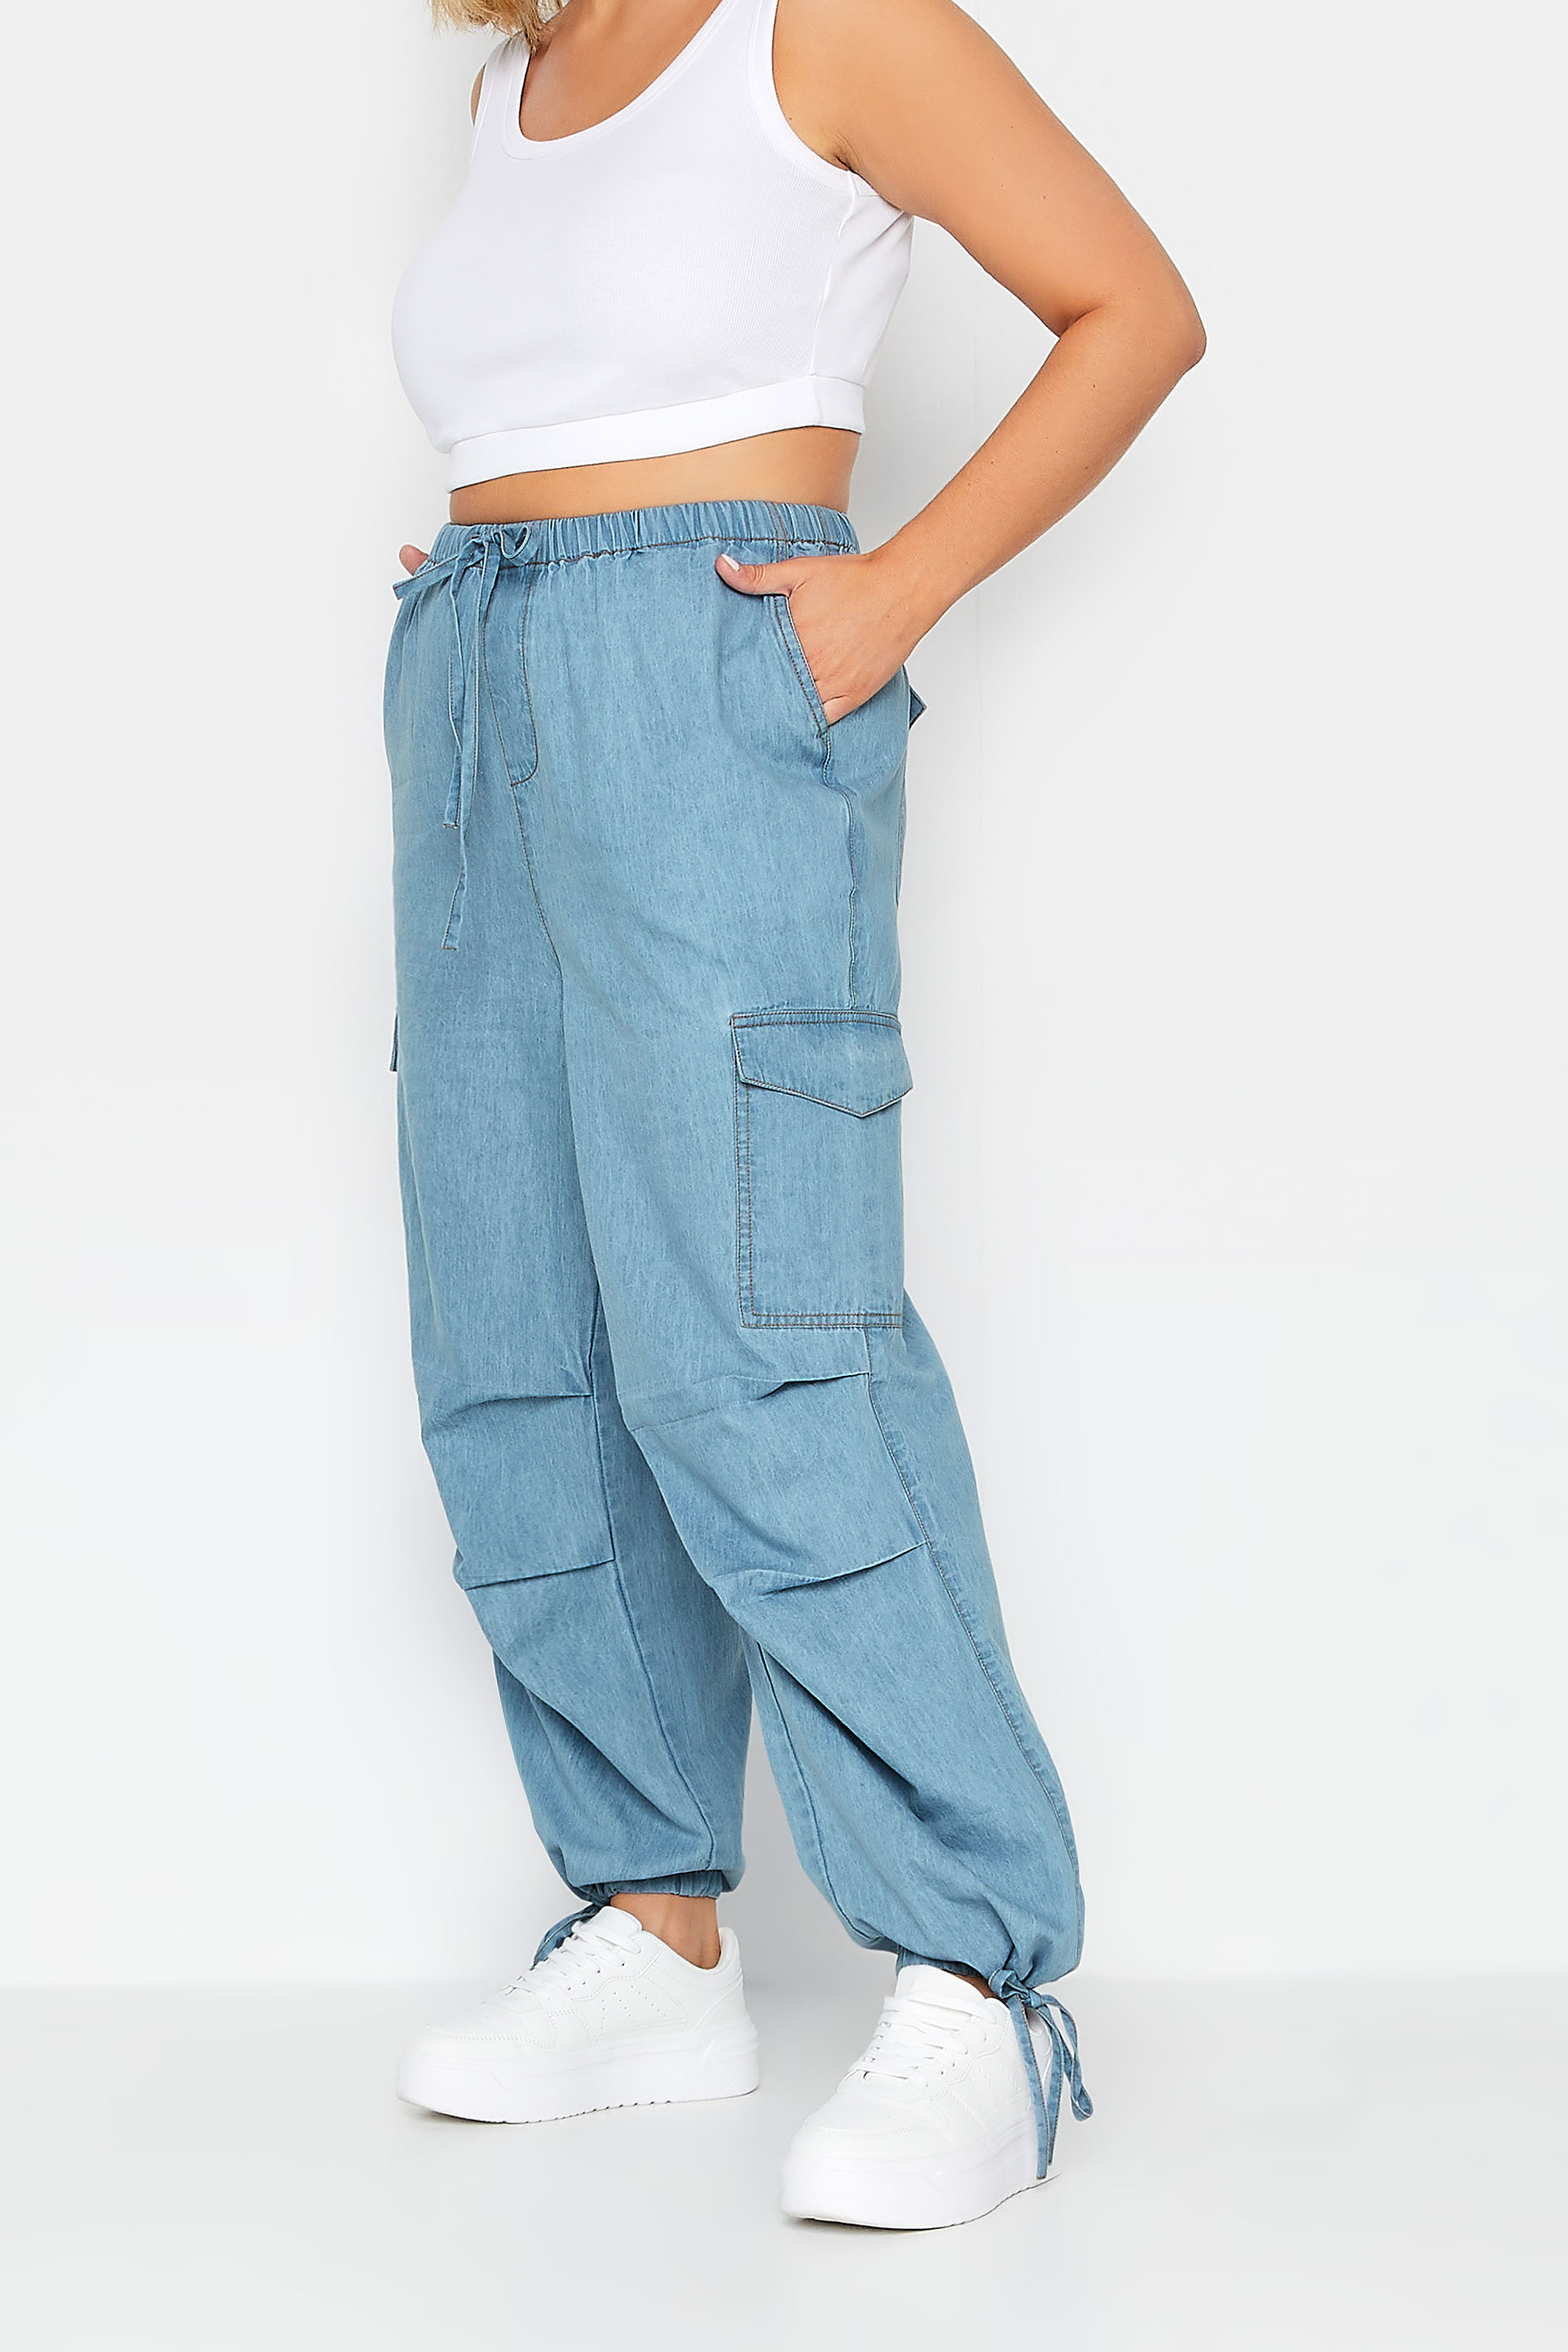 YOURS Curve Plus Size Blue Denim Cargo Jeans | Yours Clothing  1